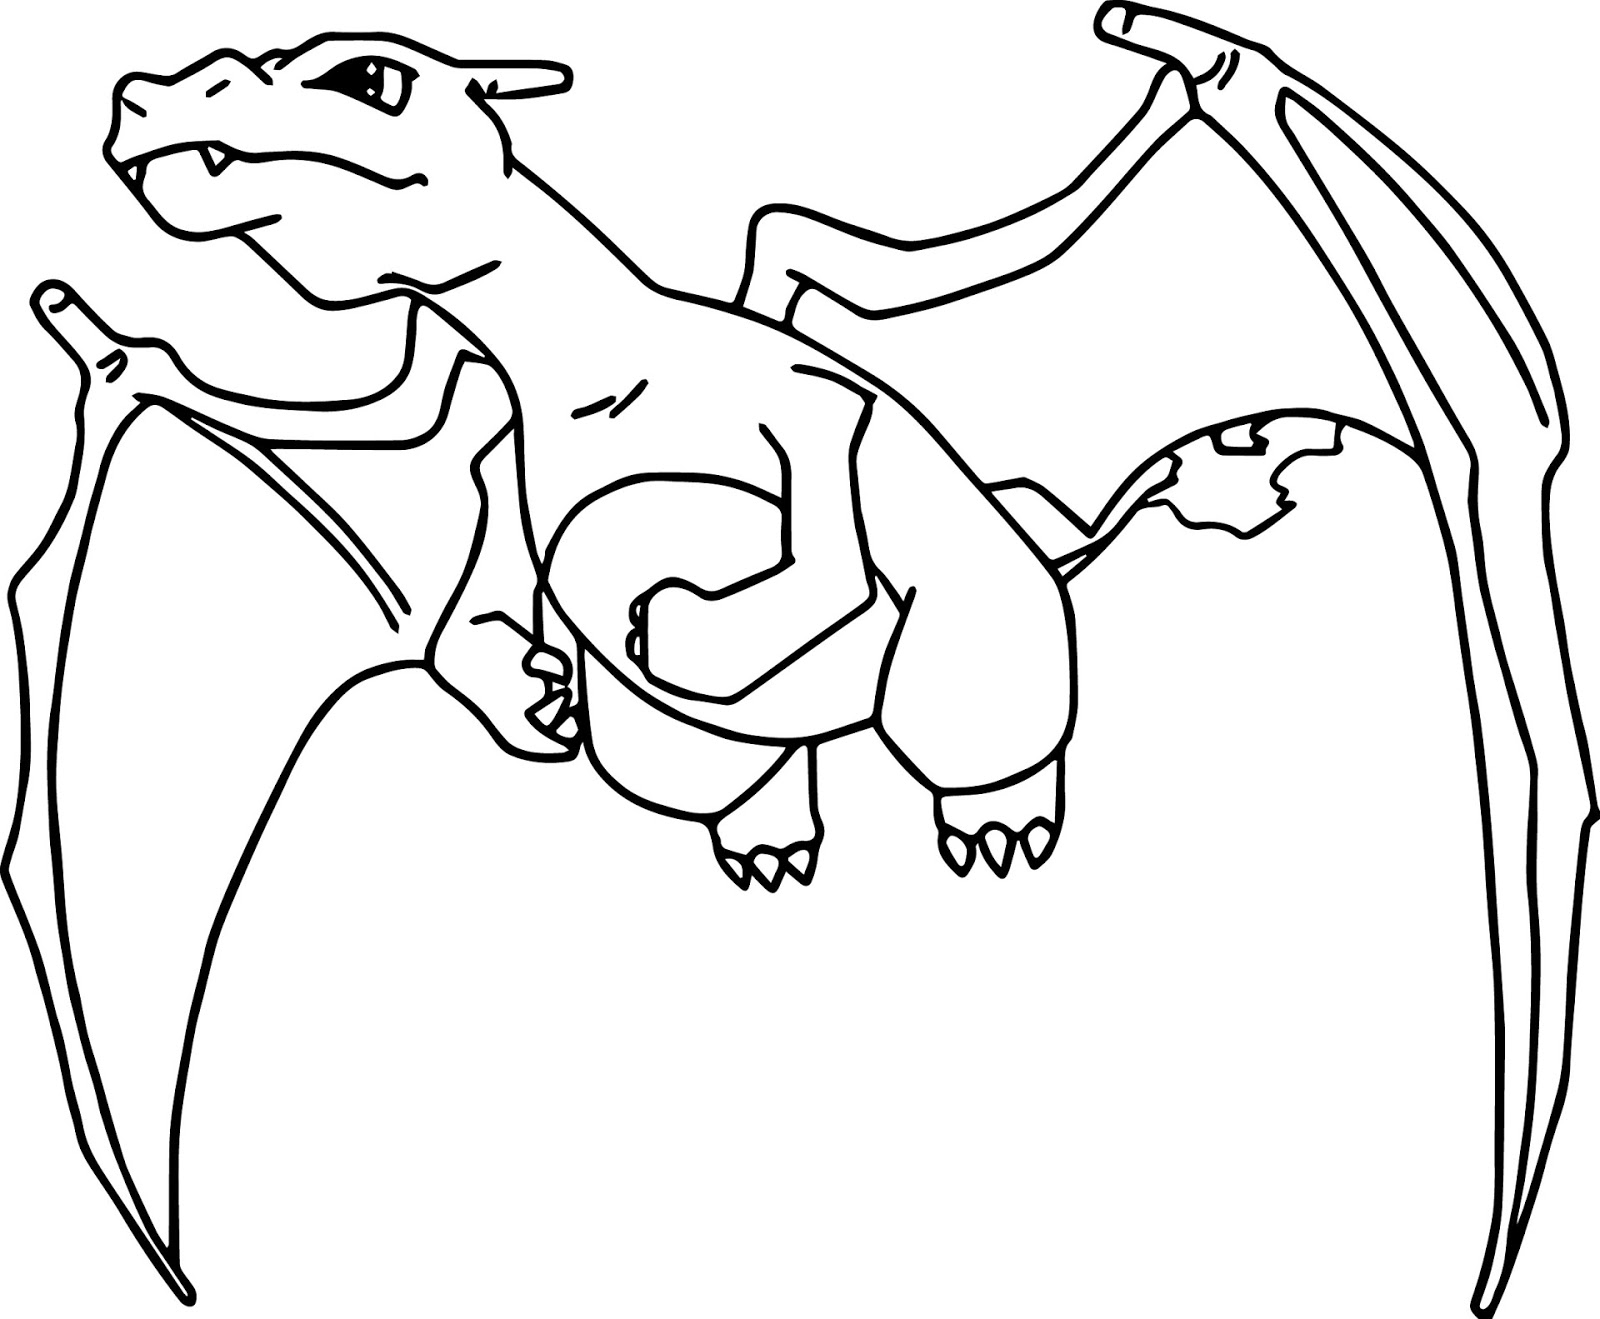 Charizard Coloring Pages Printable Charizard Coloring Pages For Free Free Pokemon Coloring